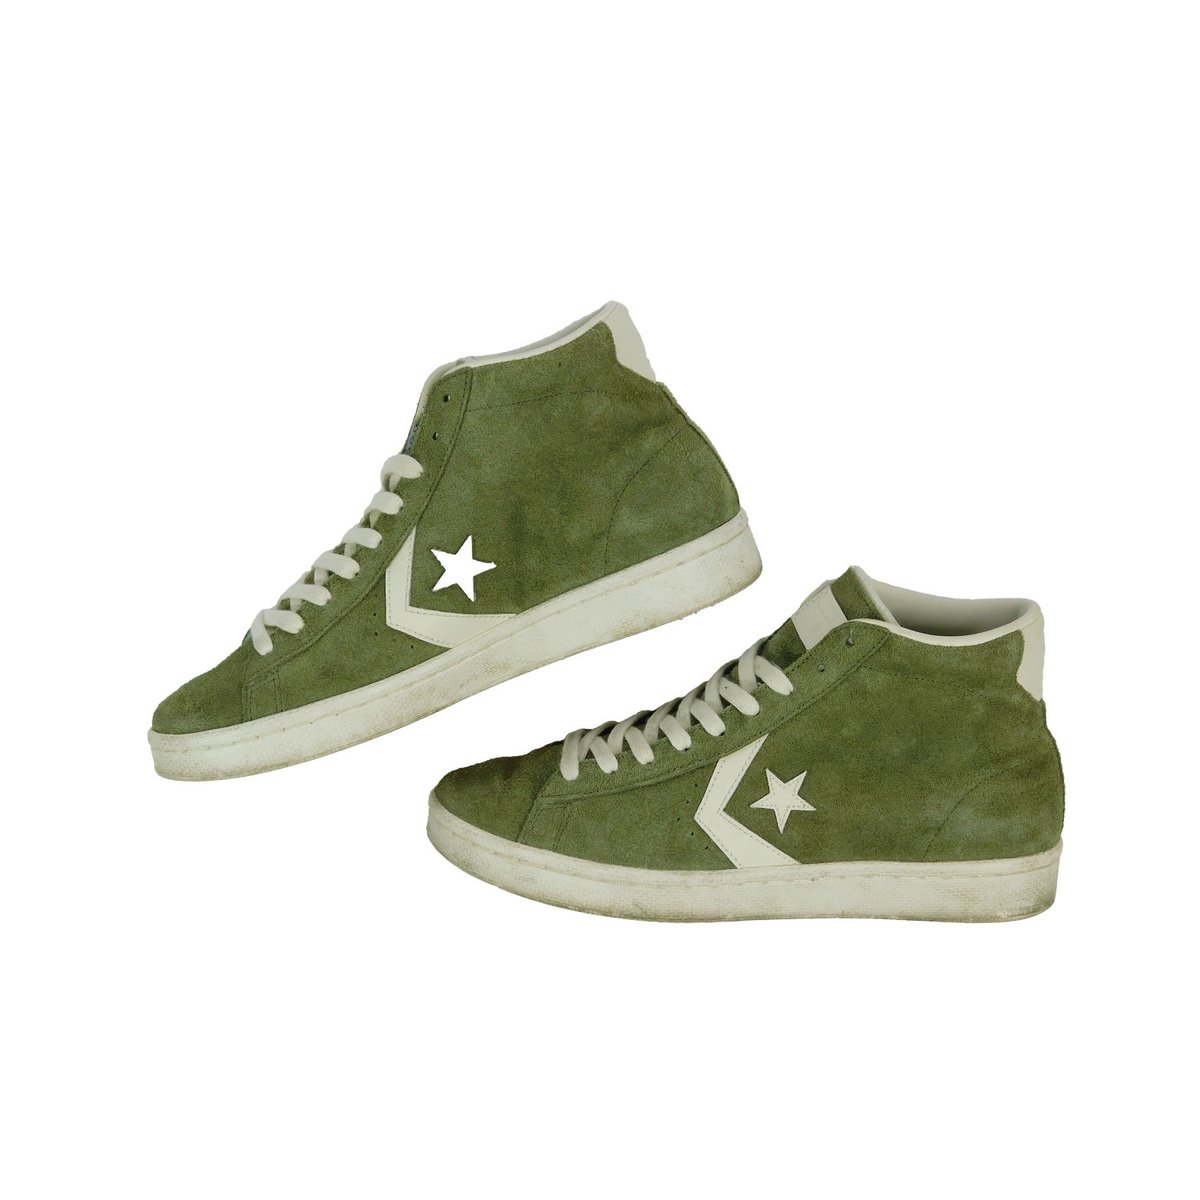 USED "CONVERSE / PRO LEATHER MID SUEDE" | DAILY...